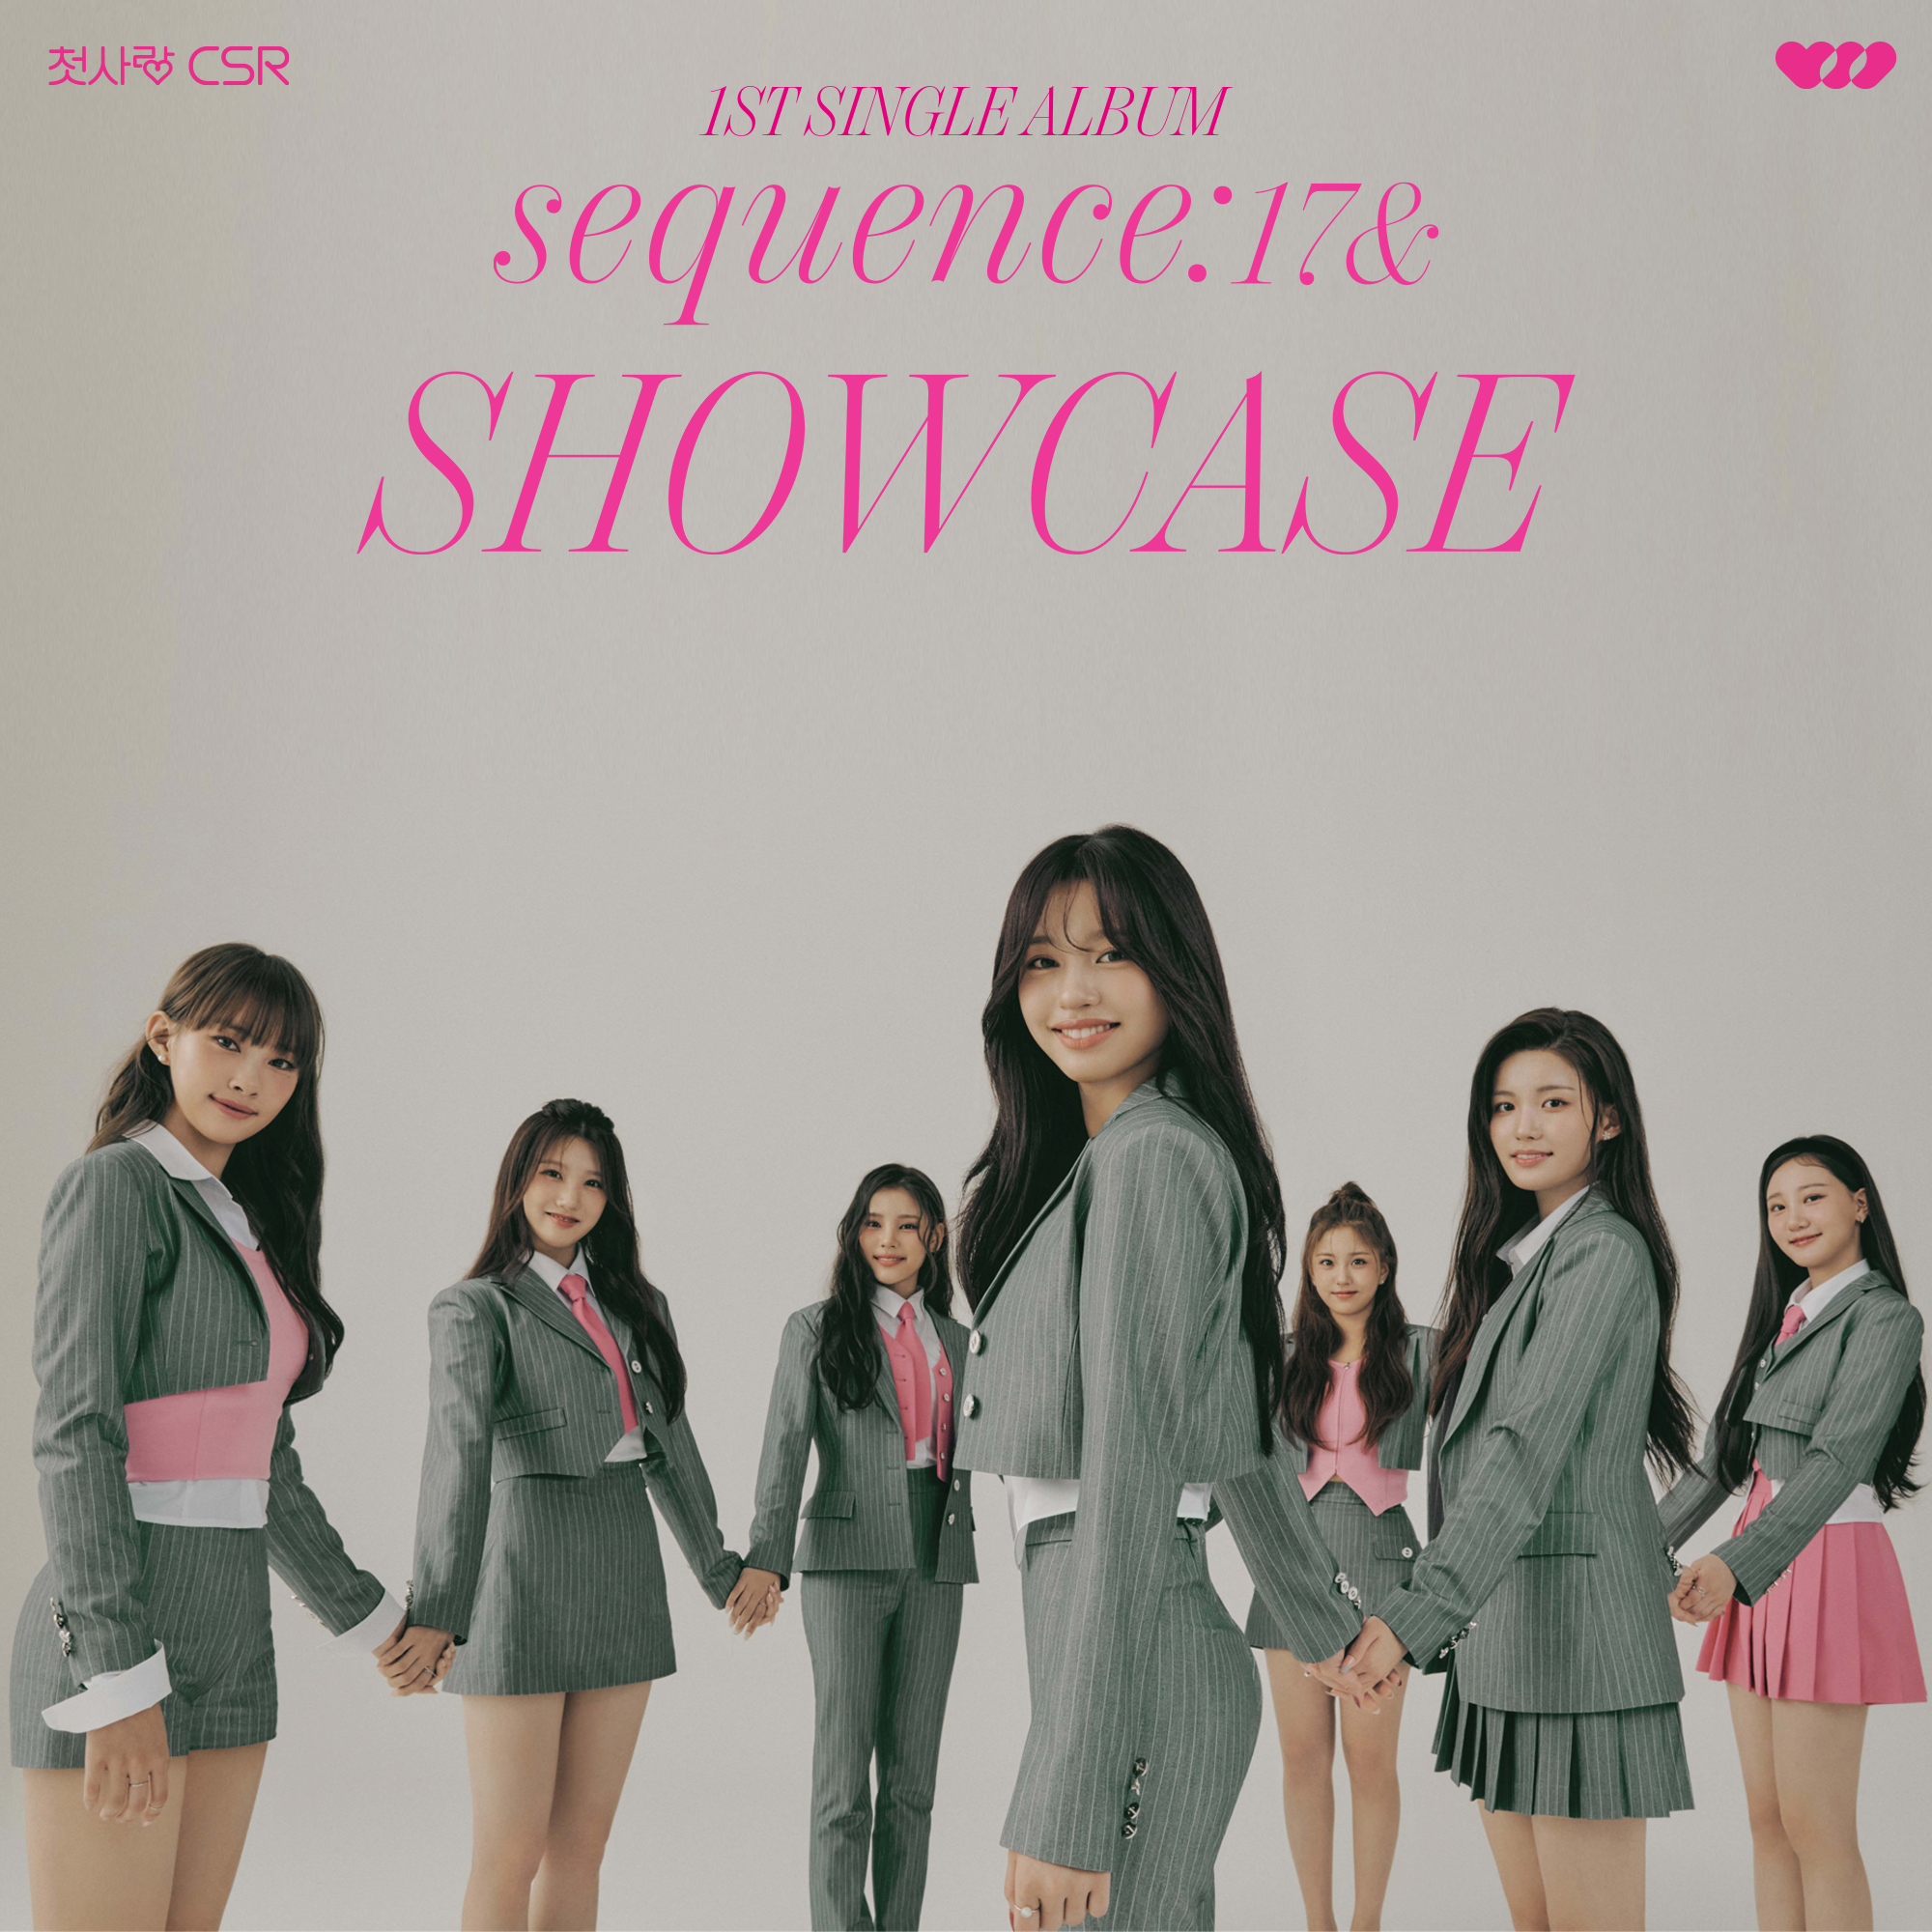 The cover of CSR's first album, Sequence17&. The girls are wearing pink and white outfits with grey blazers. They're smiling while holding hands in front of a grey wall. The name of their album and their group name is written in light pink cursive script